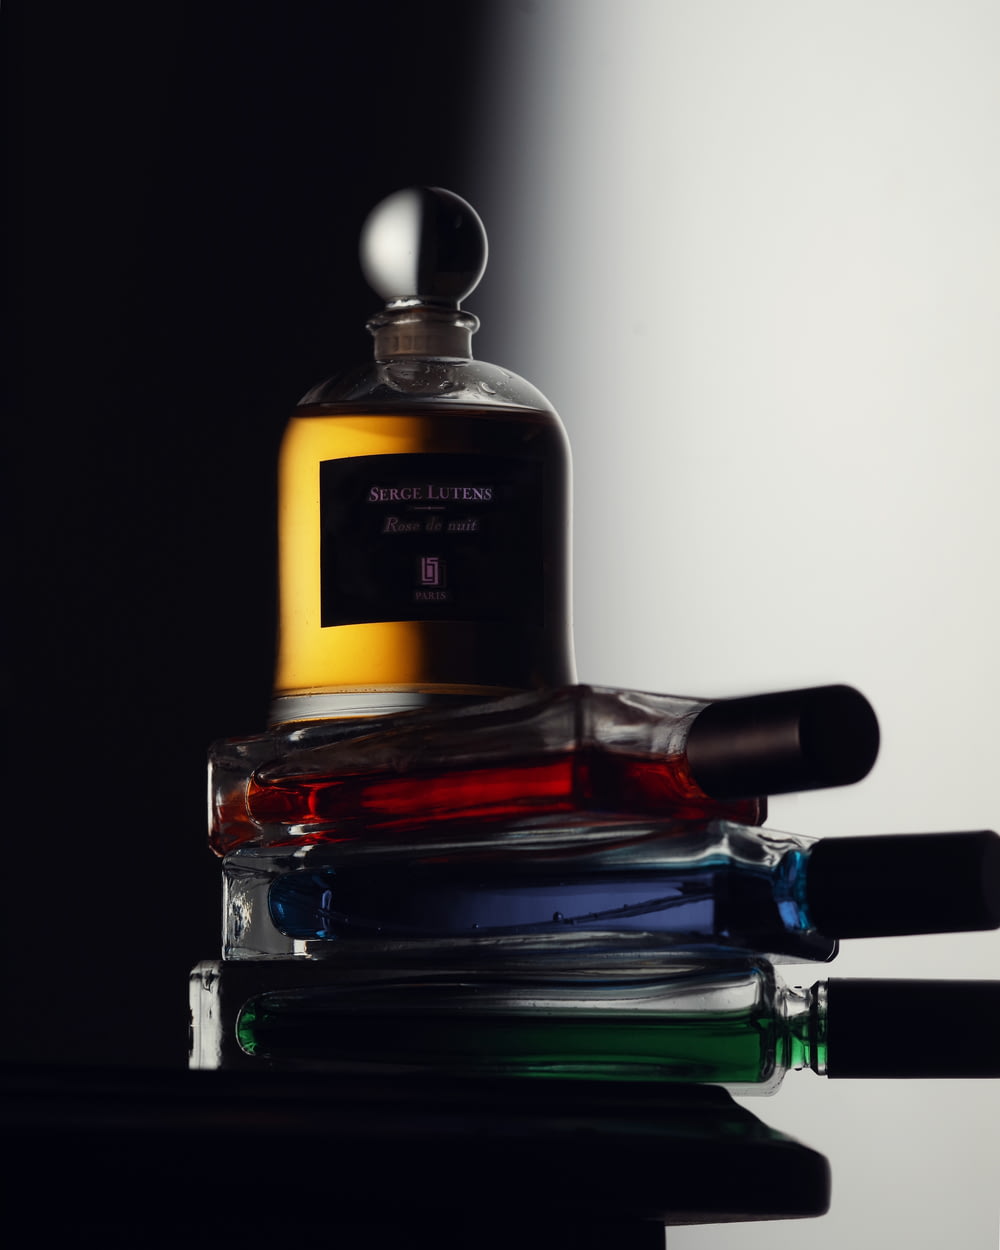 a bottle of perfume sitting on top of a table